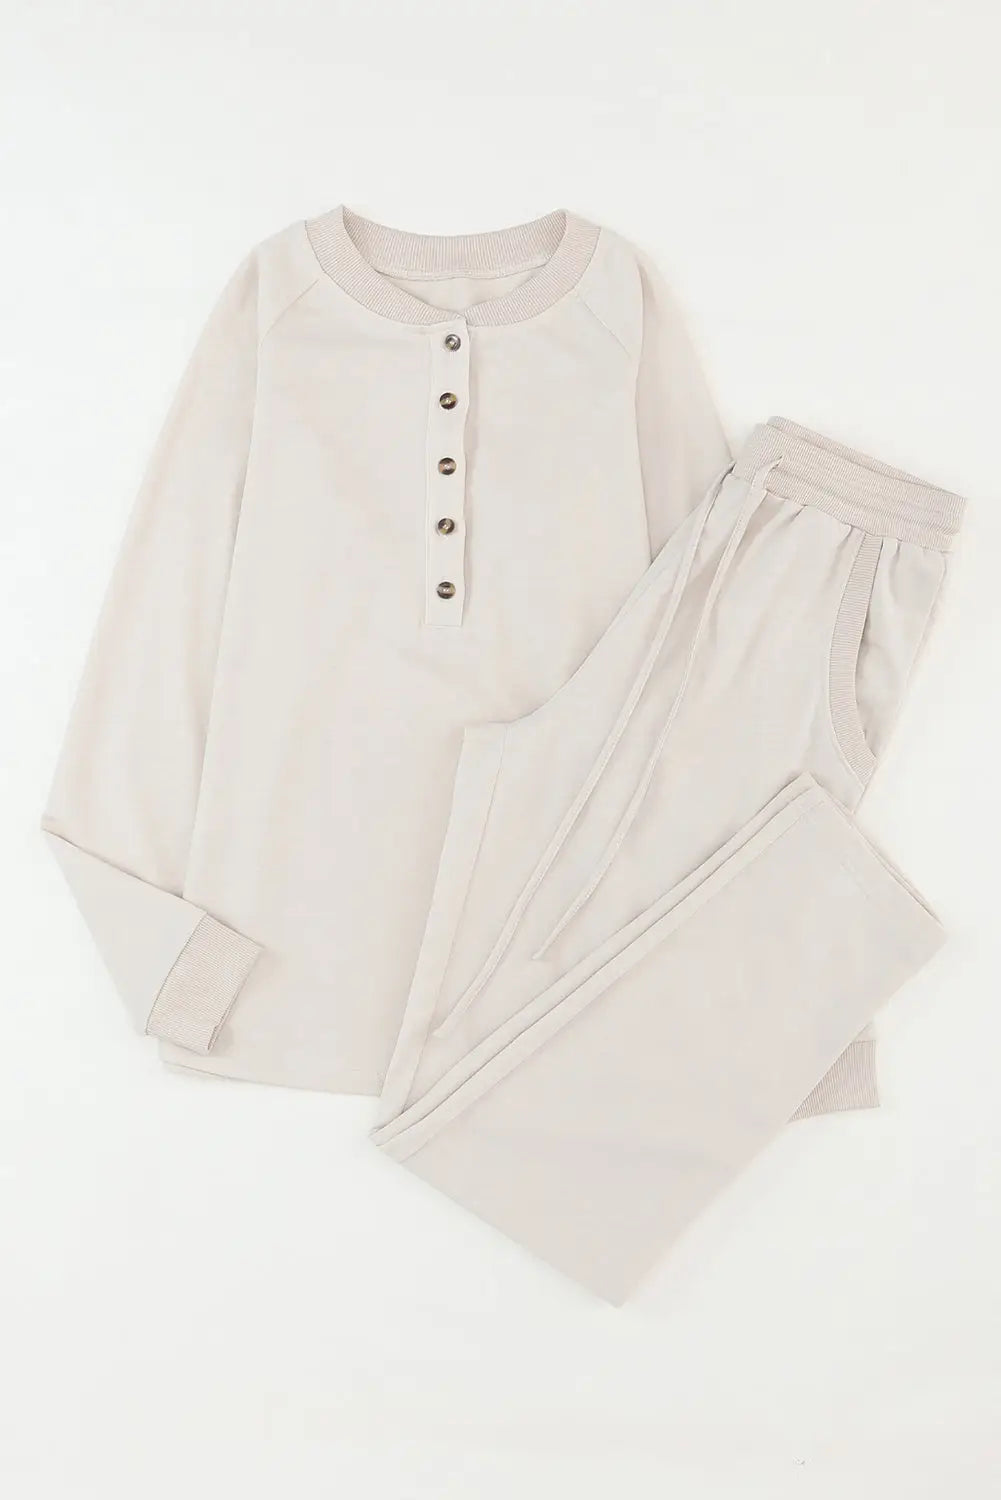 Apricot long sleeve button top and drawstring pants set -